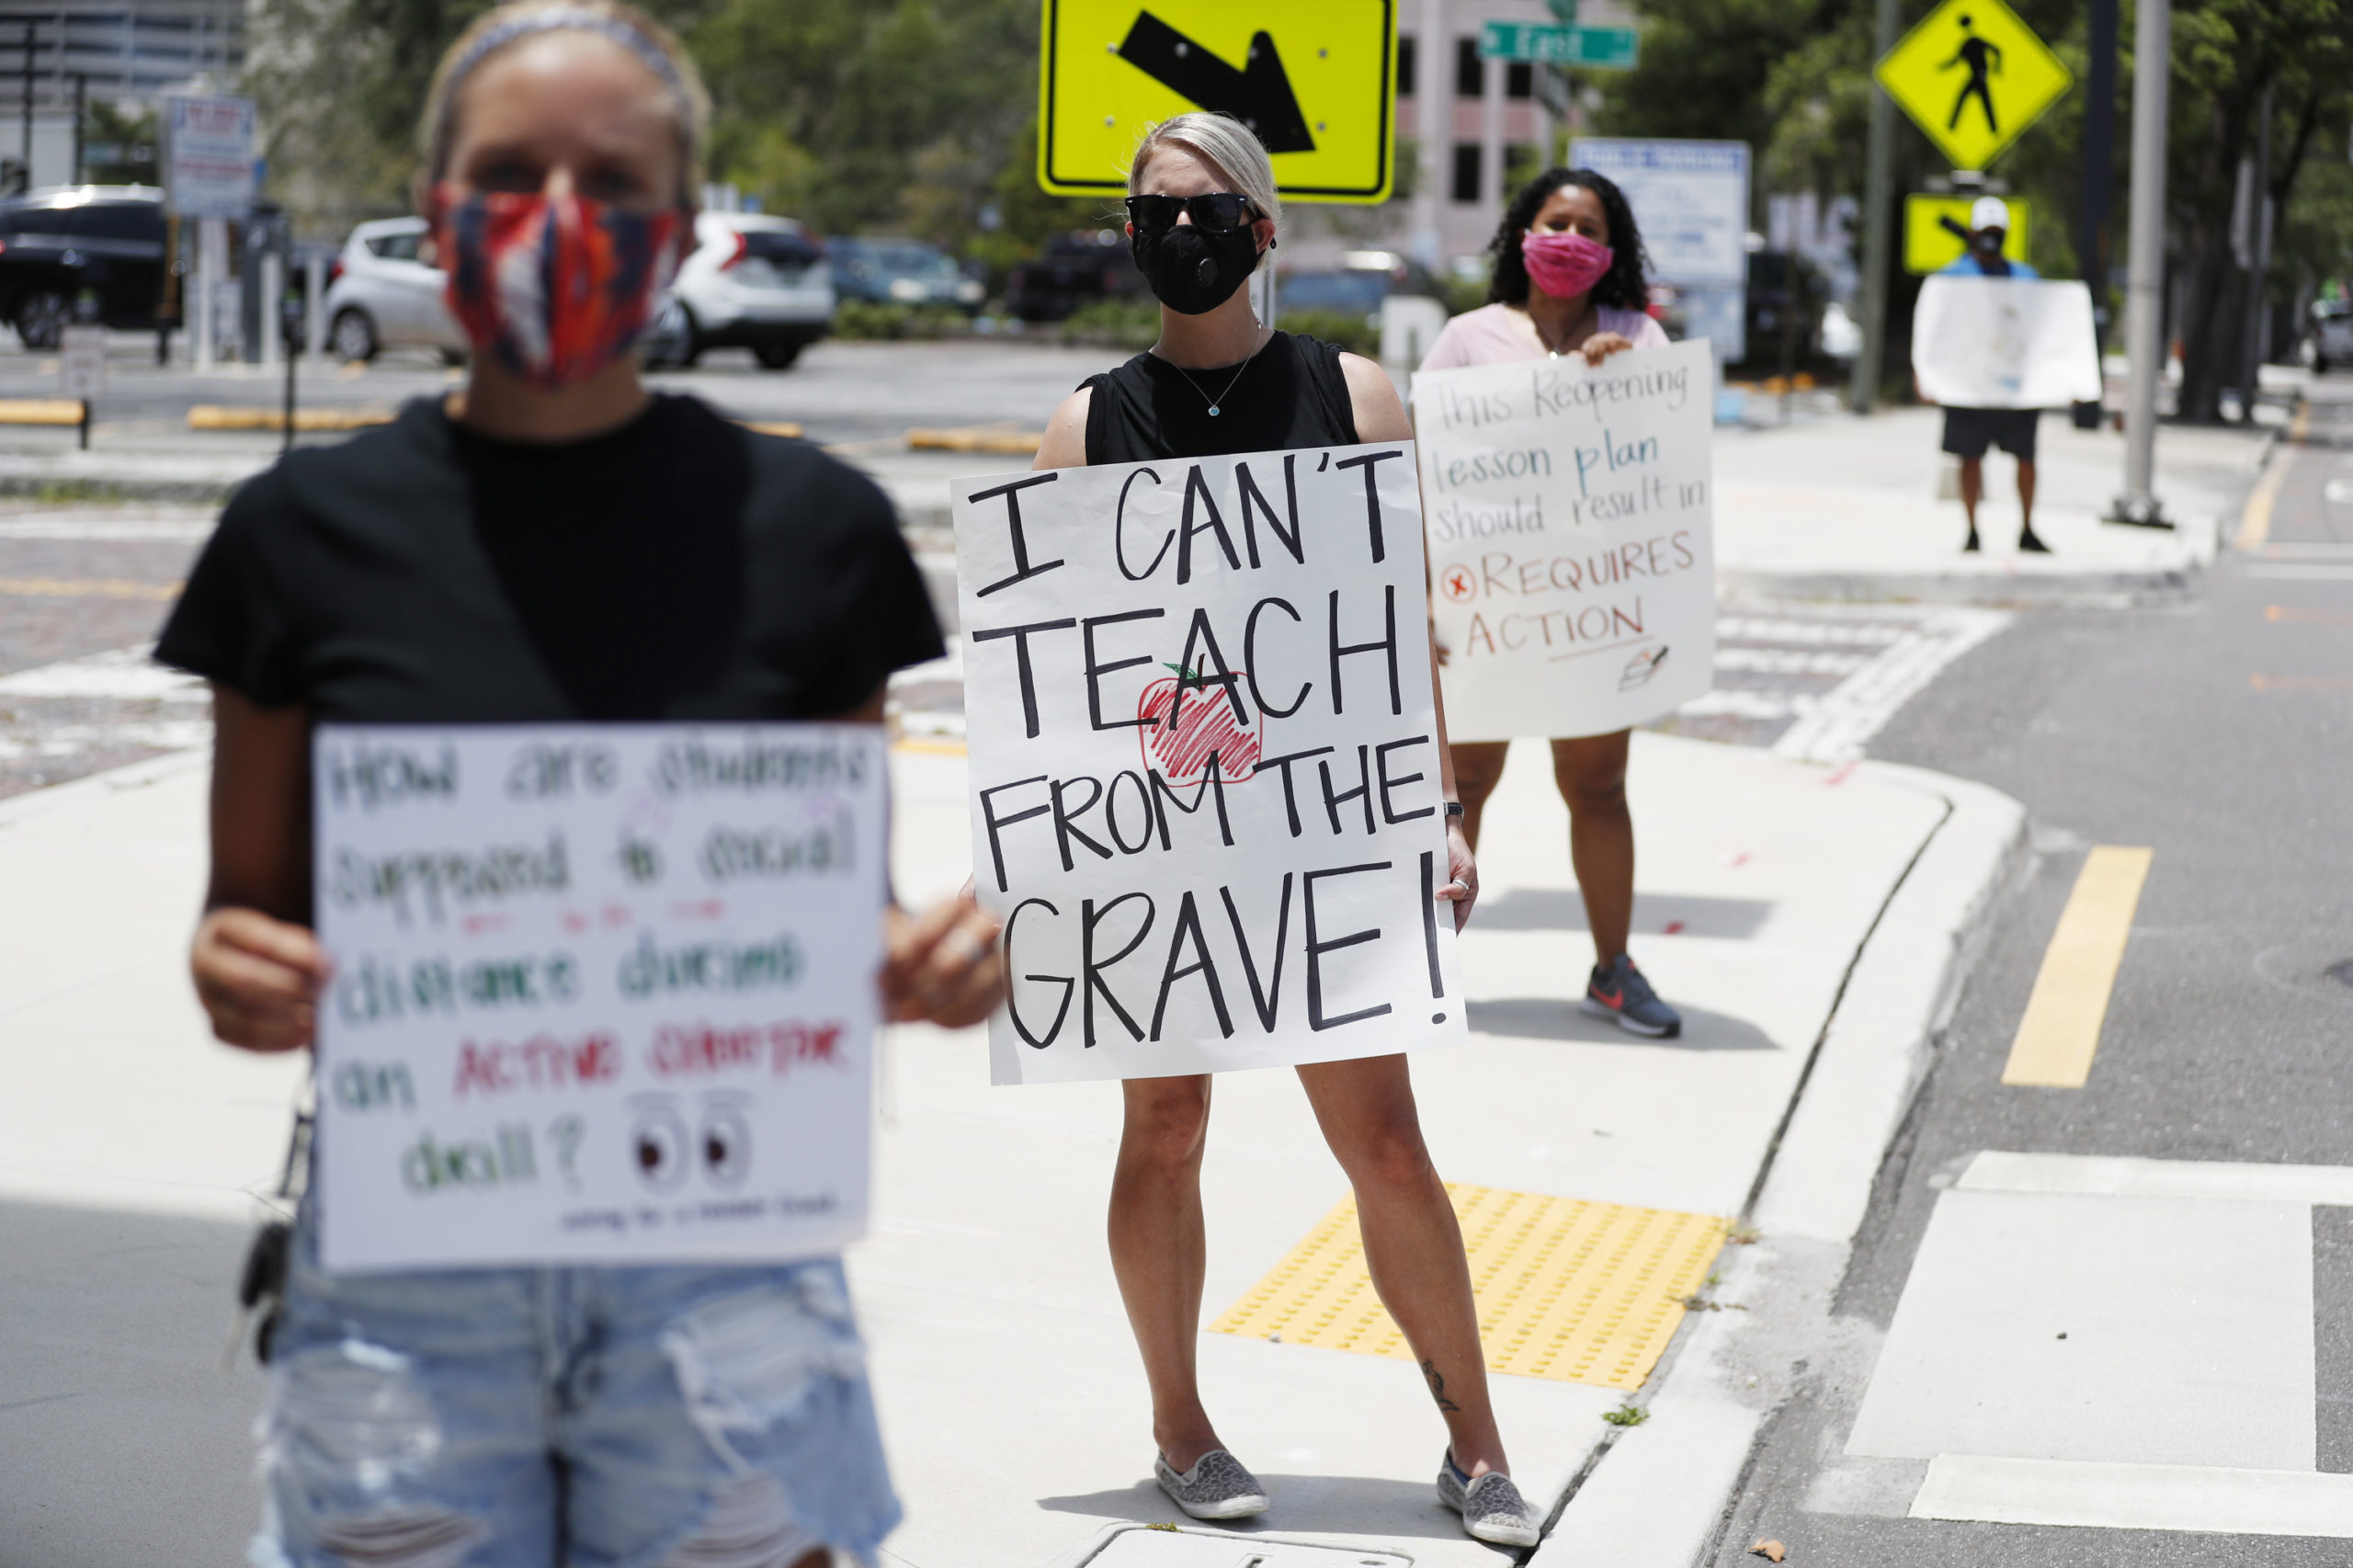 TAMPA, FL - JULY 16: Middle school teacher Brittany Myers, (C) stands in protest in front of the Hillsborough County Schools District Office on July 16, 2020 in Tampa, Florida. Teachers and administrators from Hillsborough County Schools rallied against the reopening of schools due to health and safety concerns amid the COVID-19 pandemic. (Photo by Octavio Jones/Getty Images)